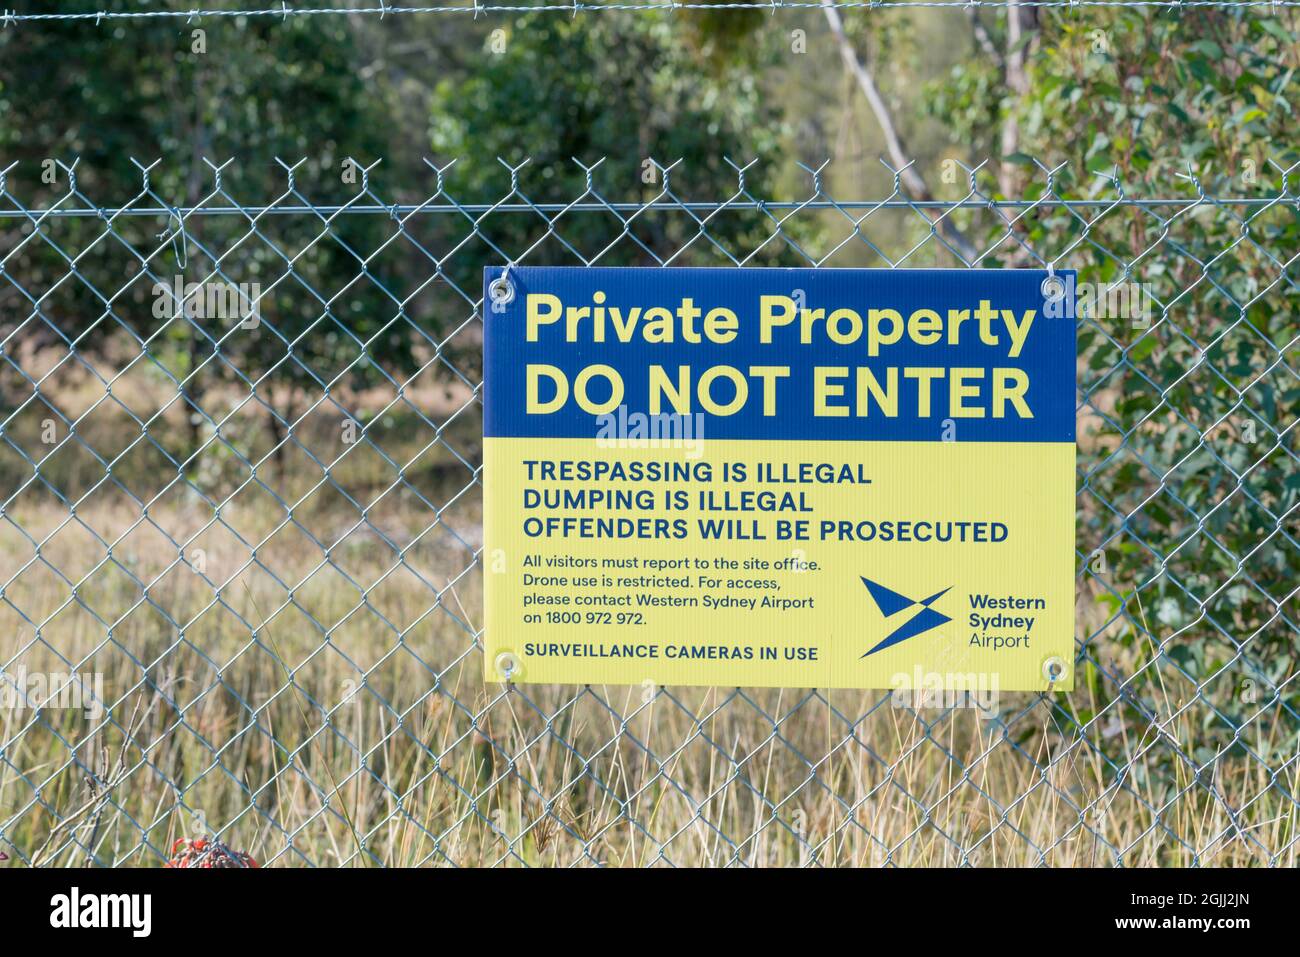 A warning and identification sign on a fence surrounding the new Western Sydney (Nancy Bird Walton) International Airport due to open in 2026 Stock Photo